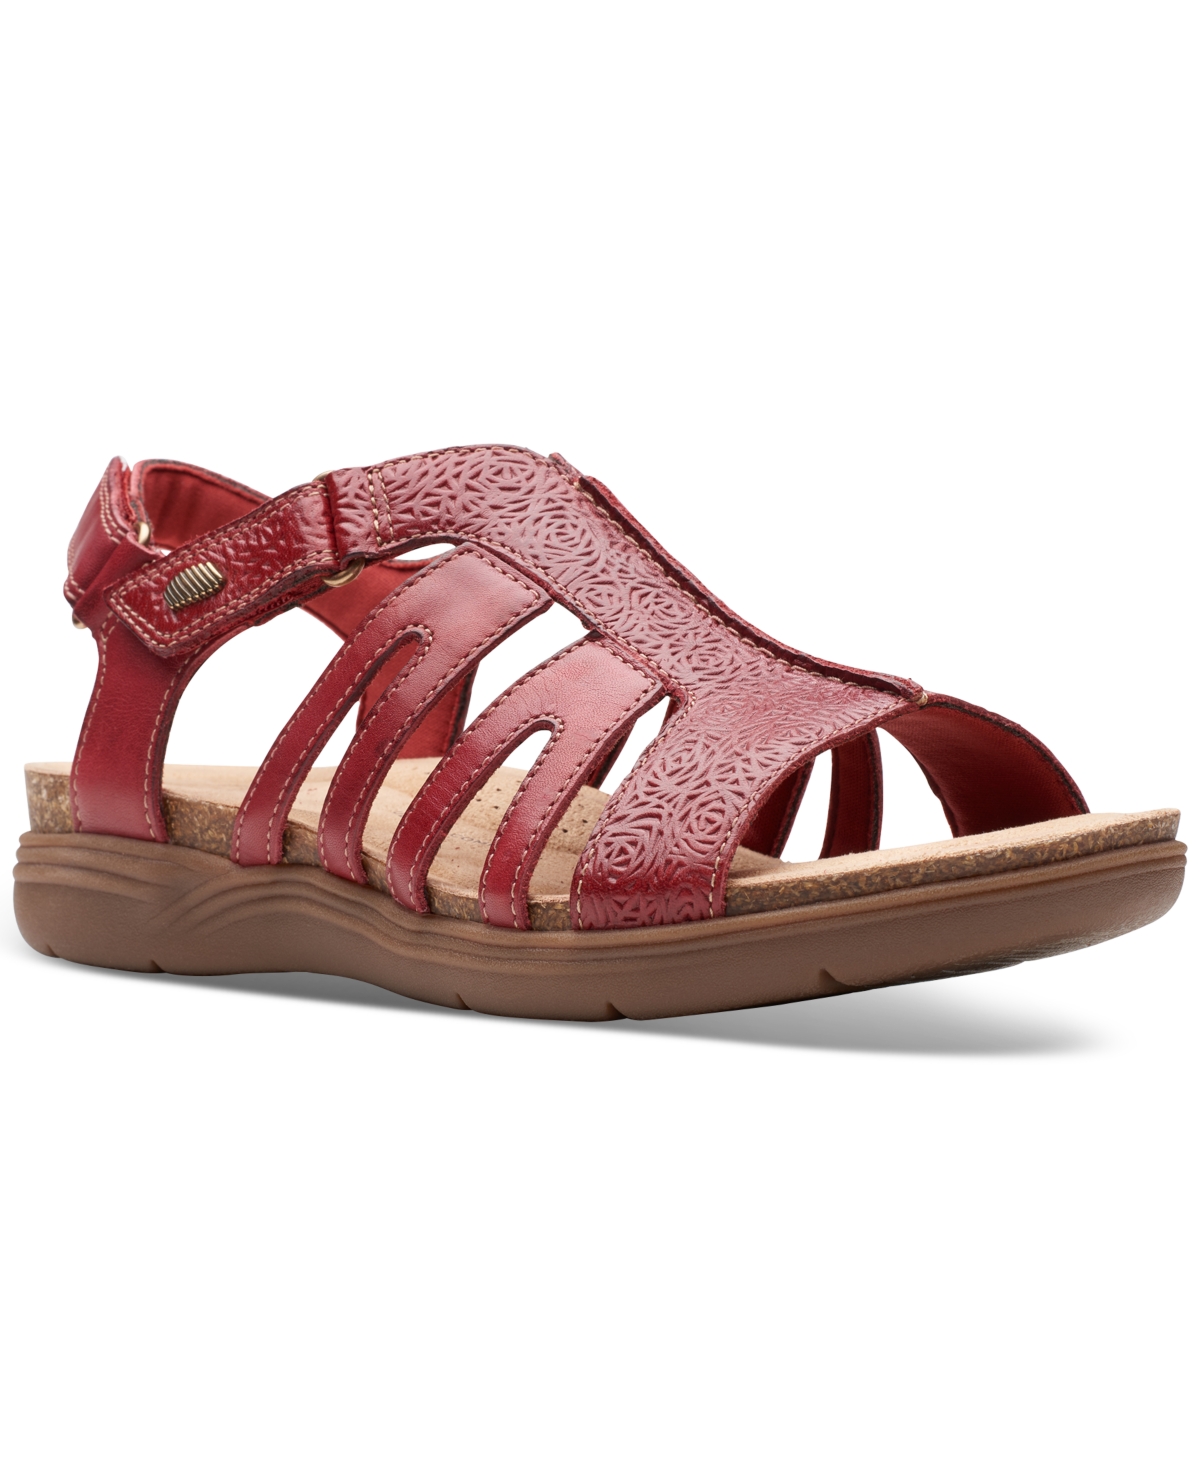 Clarks Women's April Belle Strappy Slingback Sandals In Red Leathe